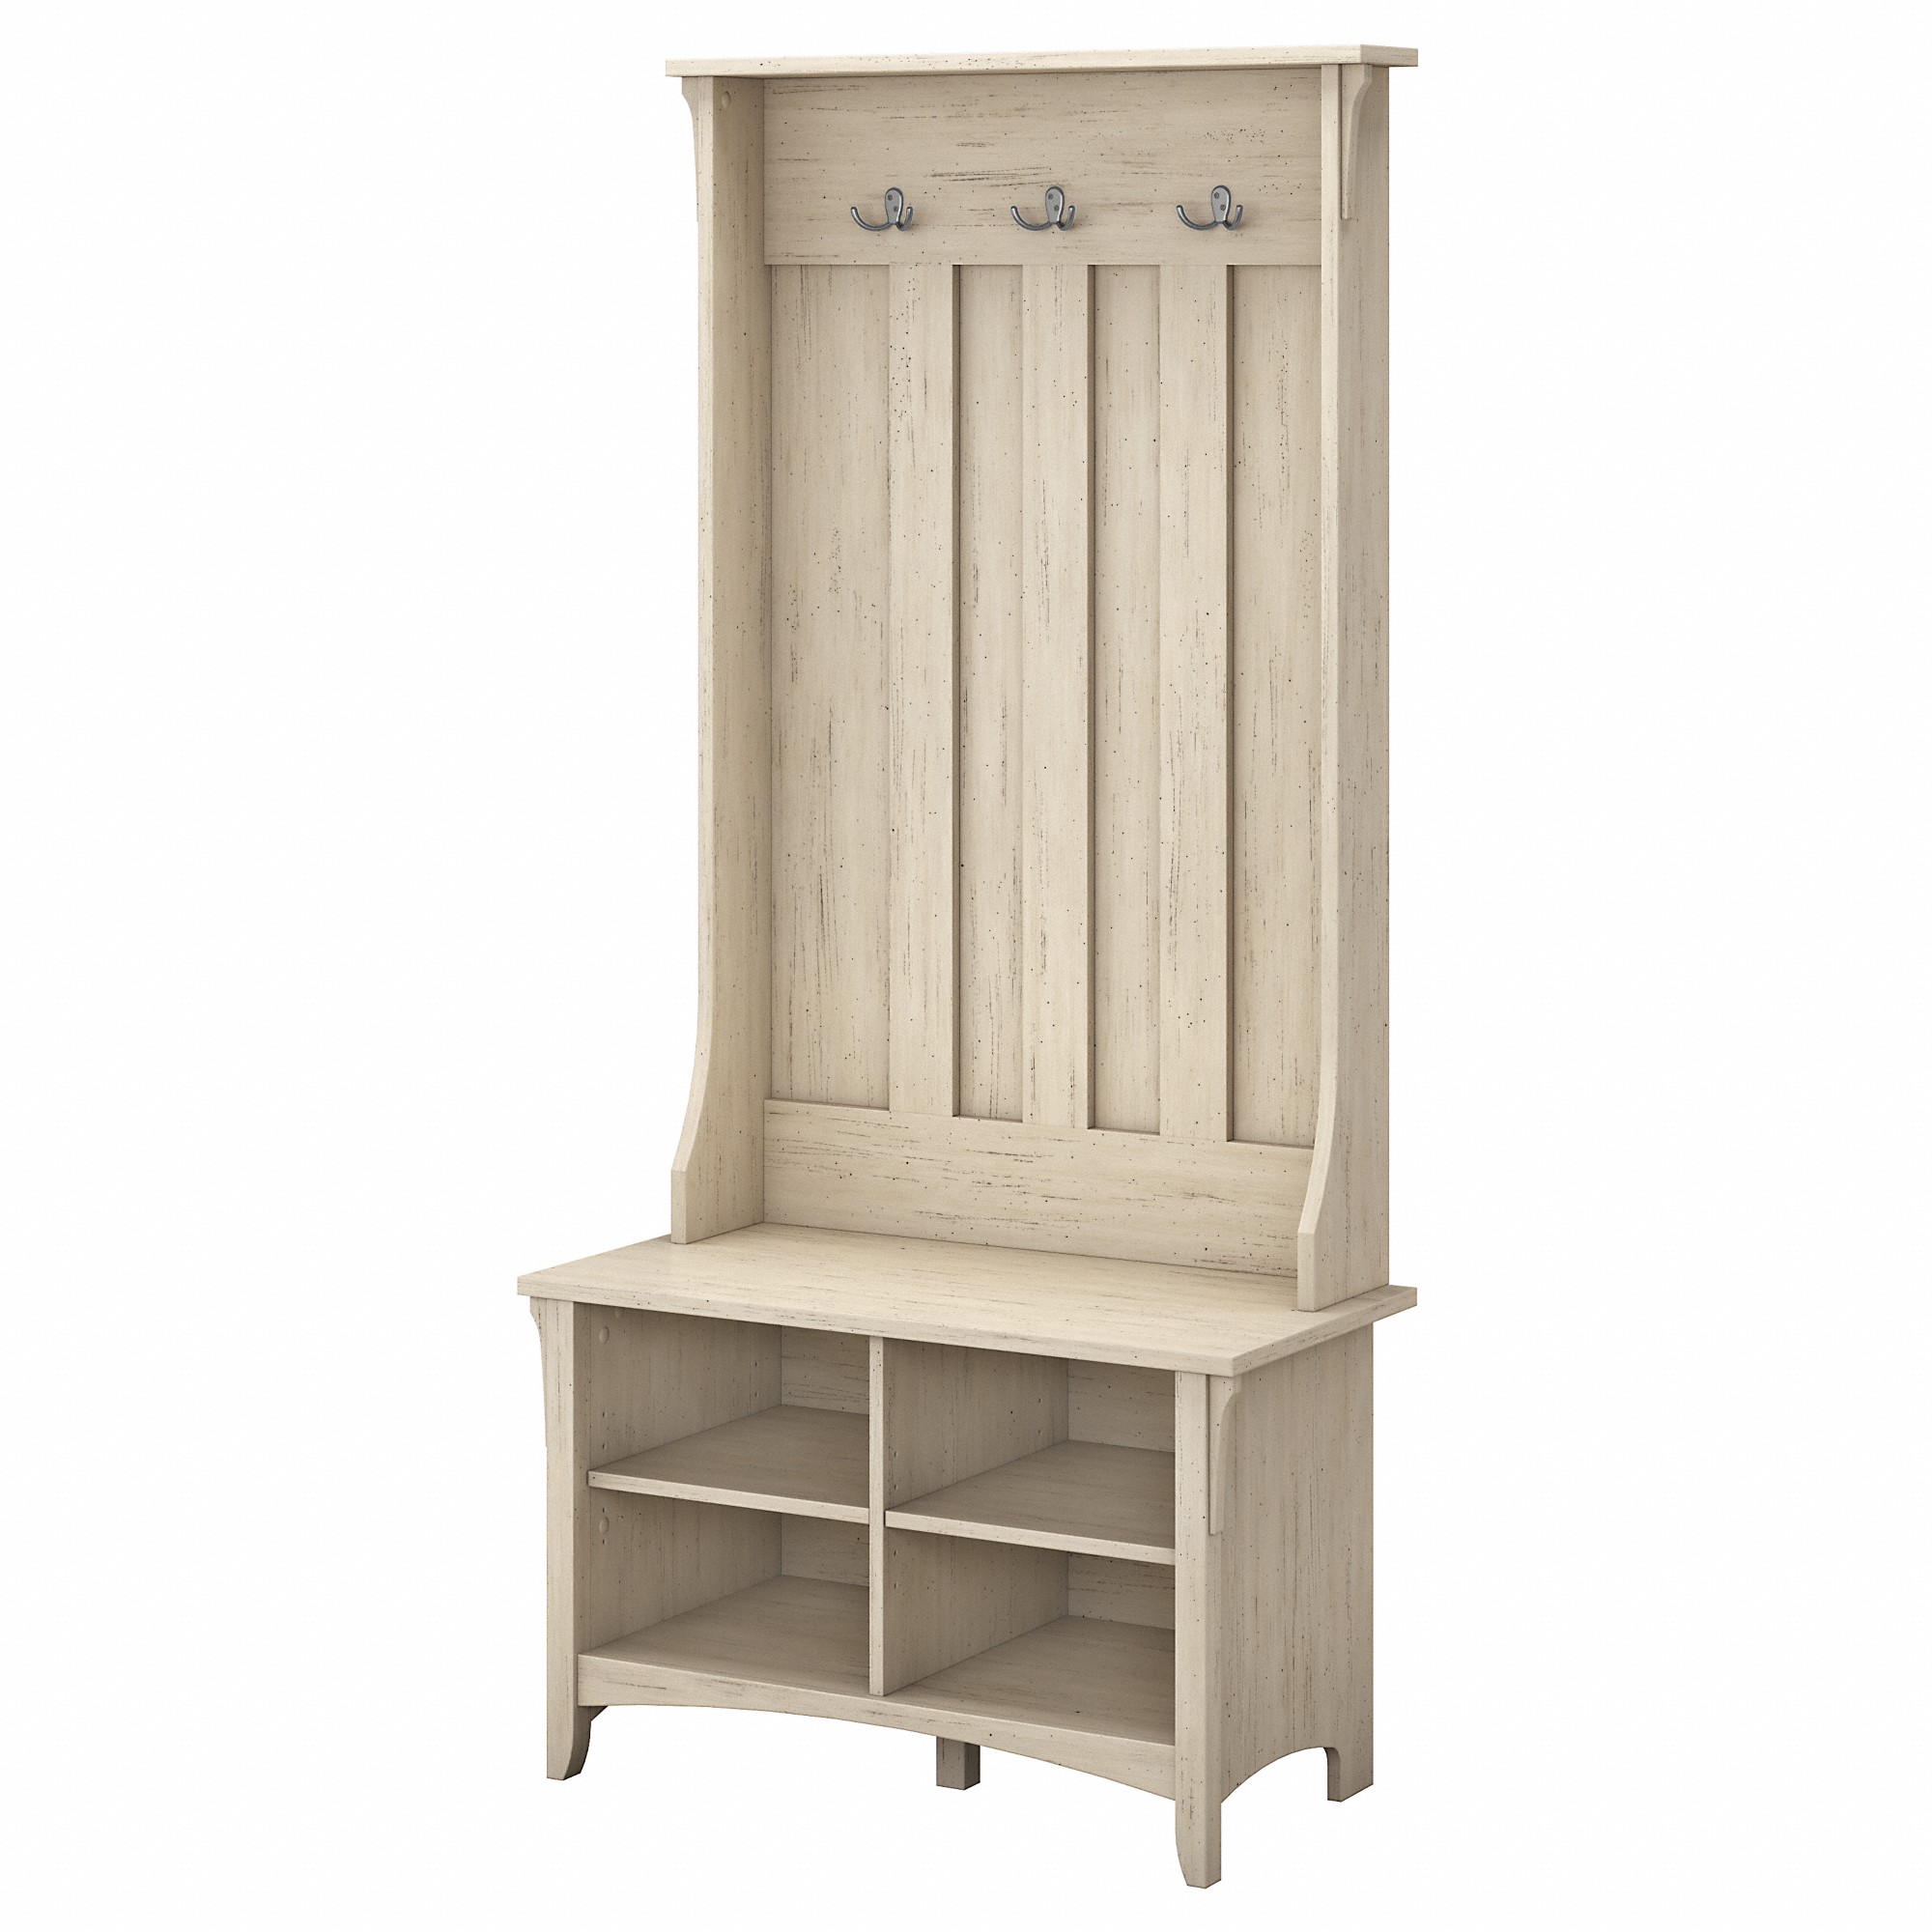 Bush Furniture Salinas Traditional 6-Hook Hall Tree with Storage Bench, Antique White - image 1 of 8